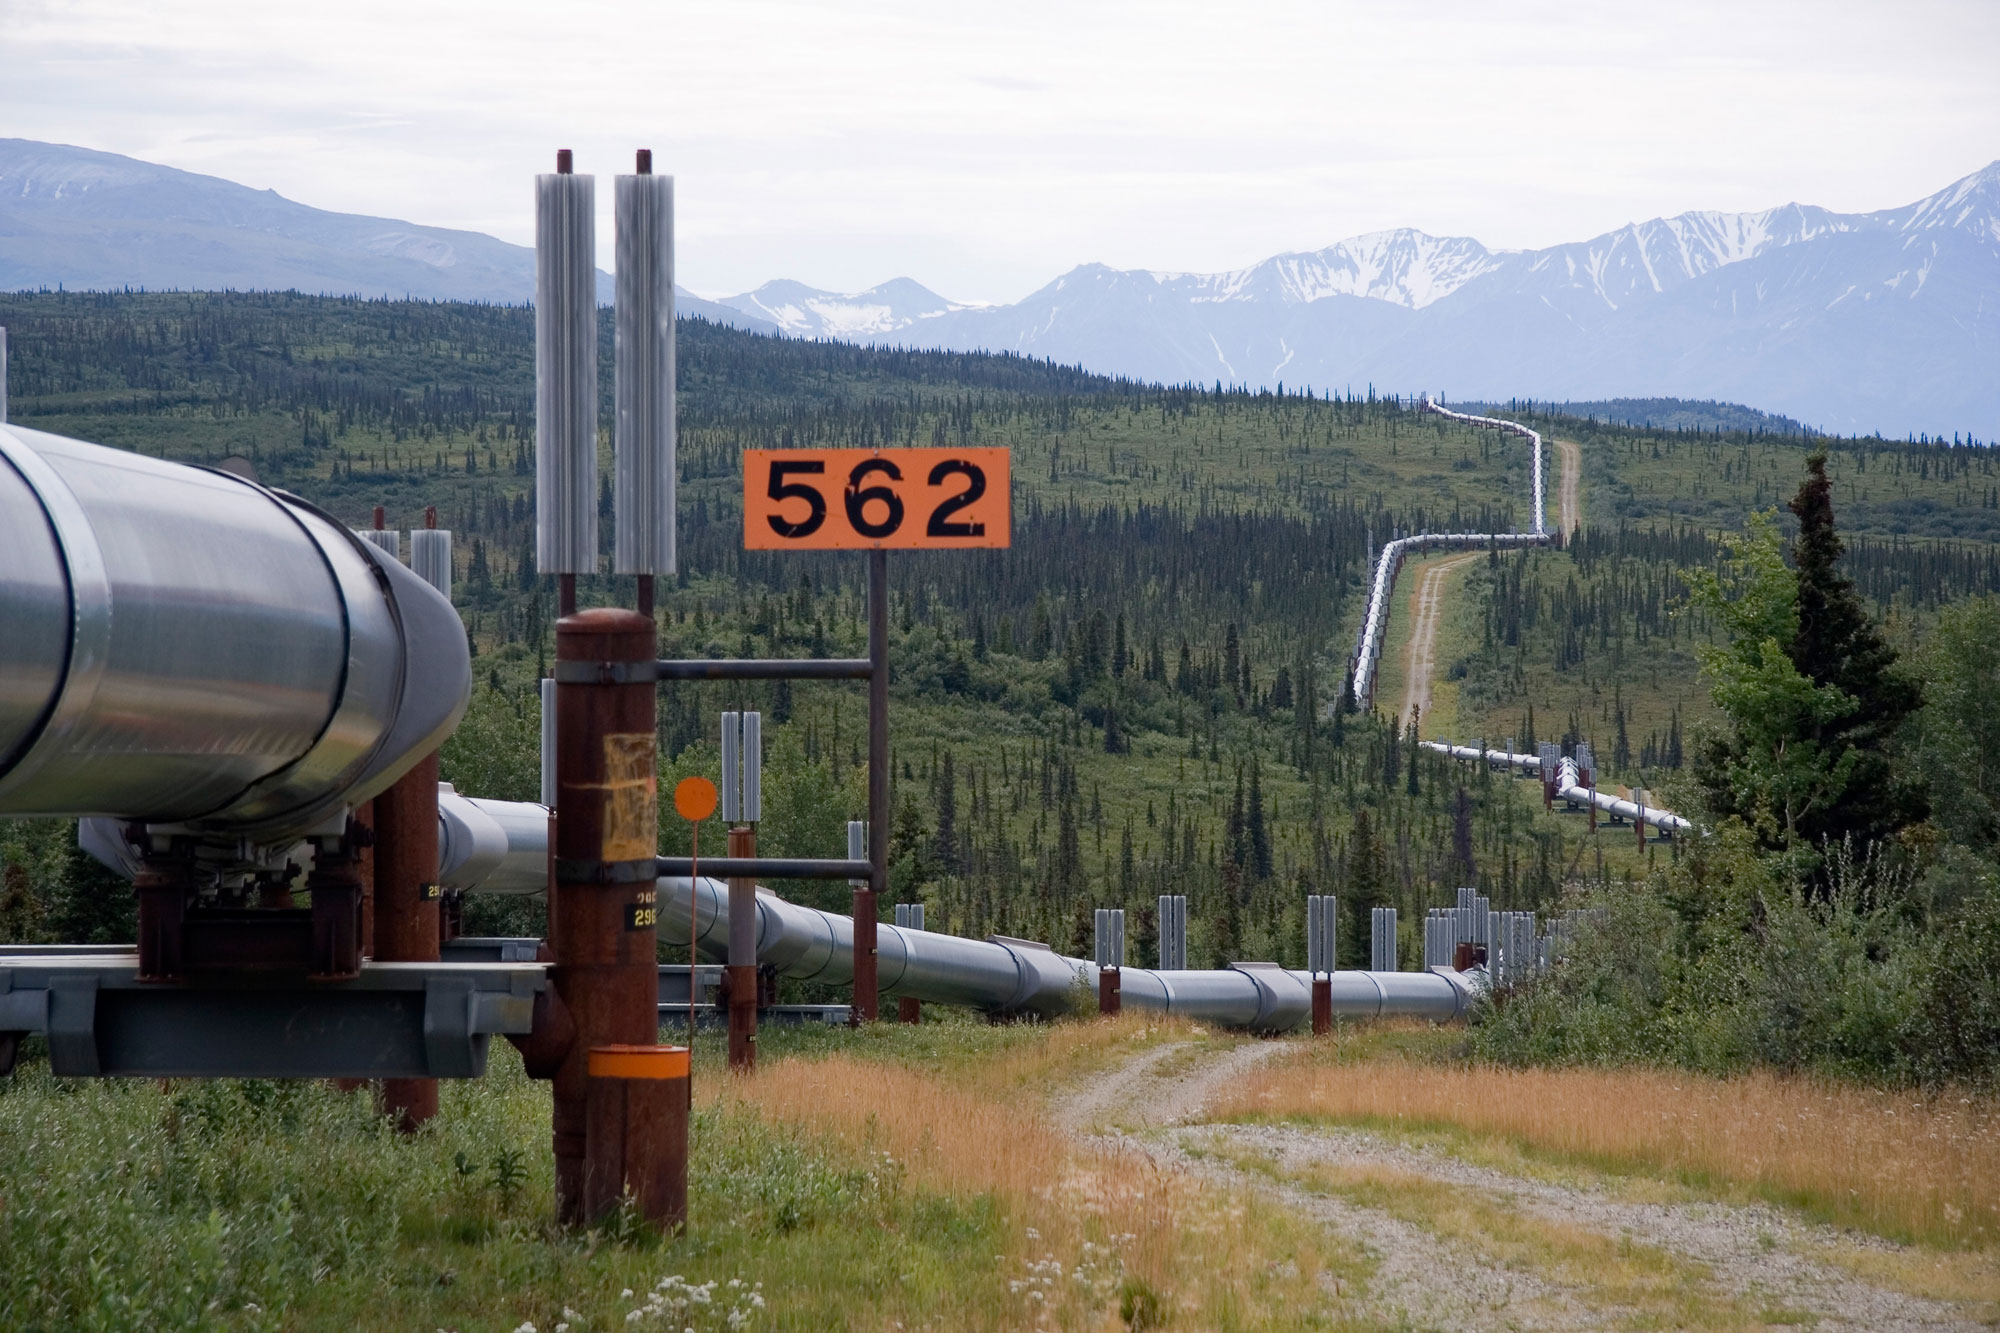 Photograph of the Trans-Alaska Pipeline, an oil pipeline that traverses Alaska from north to south. The photo shows a pipeline cutting through a hilly landscape with conifers and other vegetation. Mountains rise in the background.